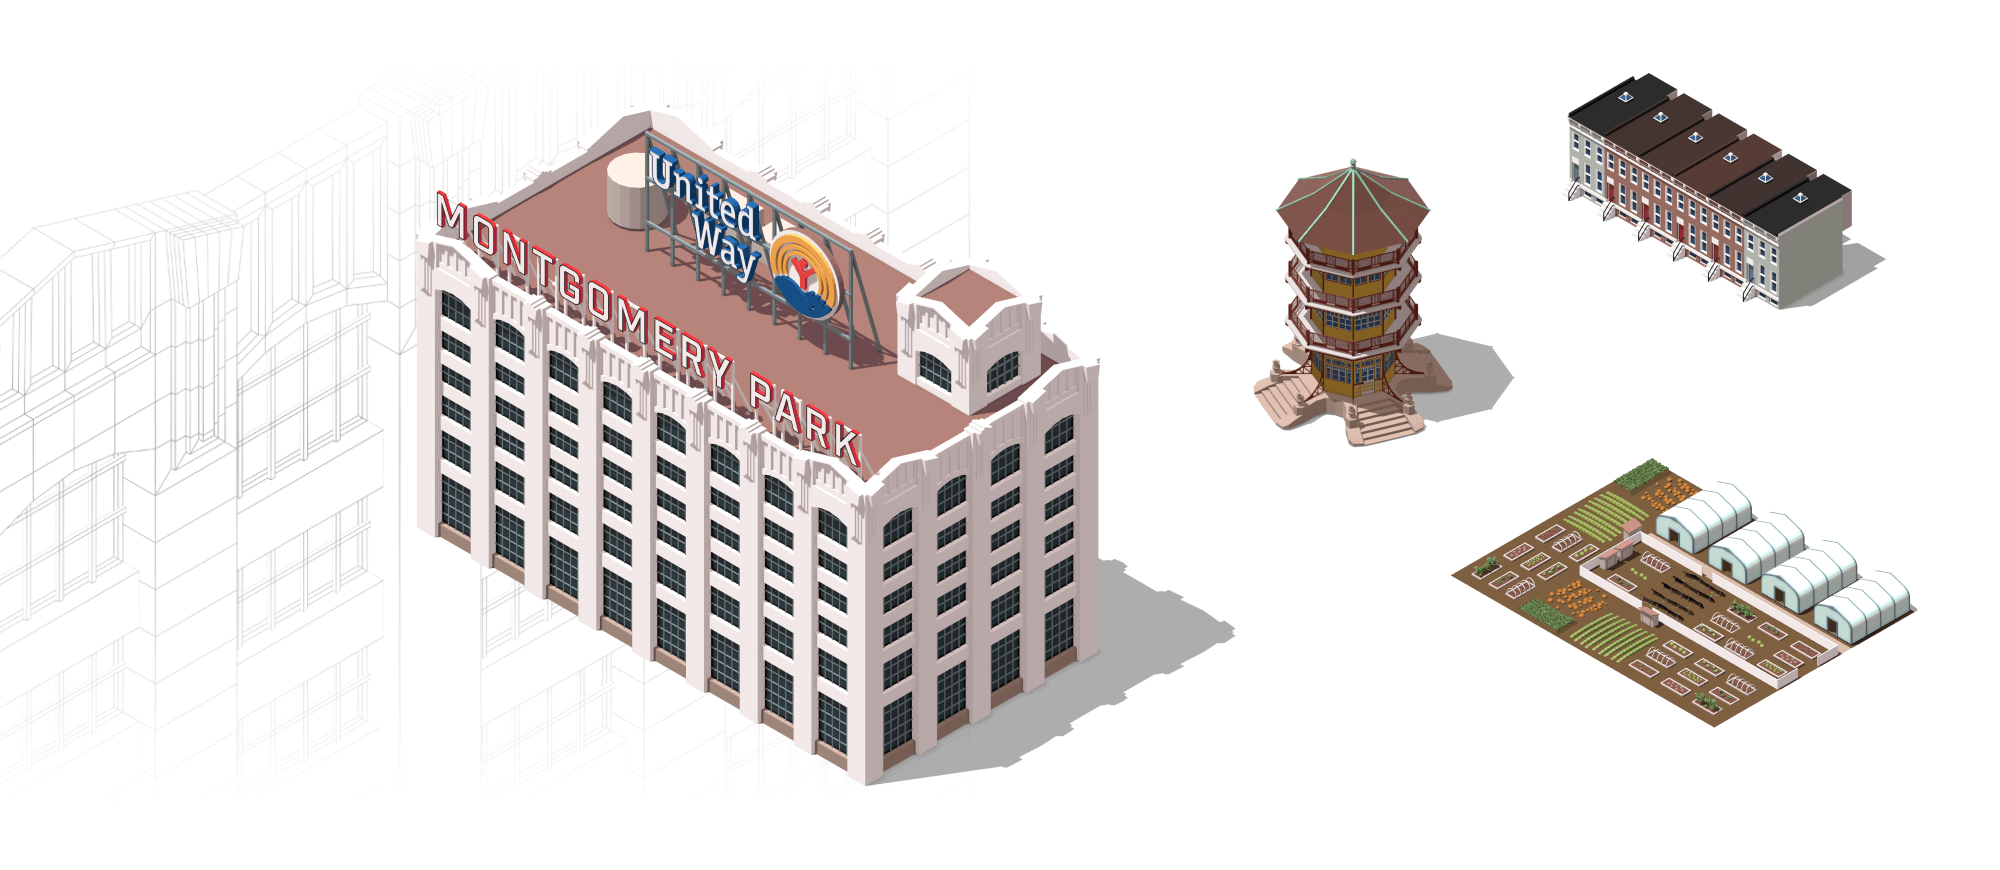 A detail view of some of the 3D isometric buildings.